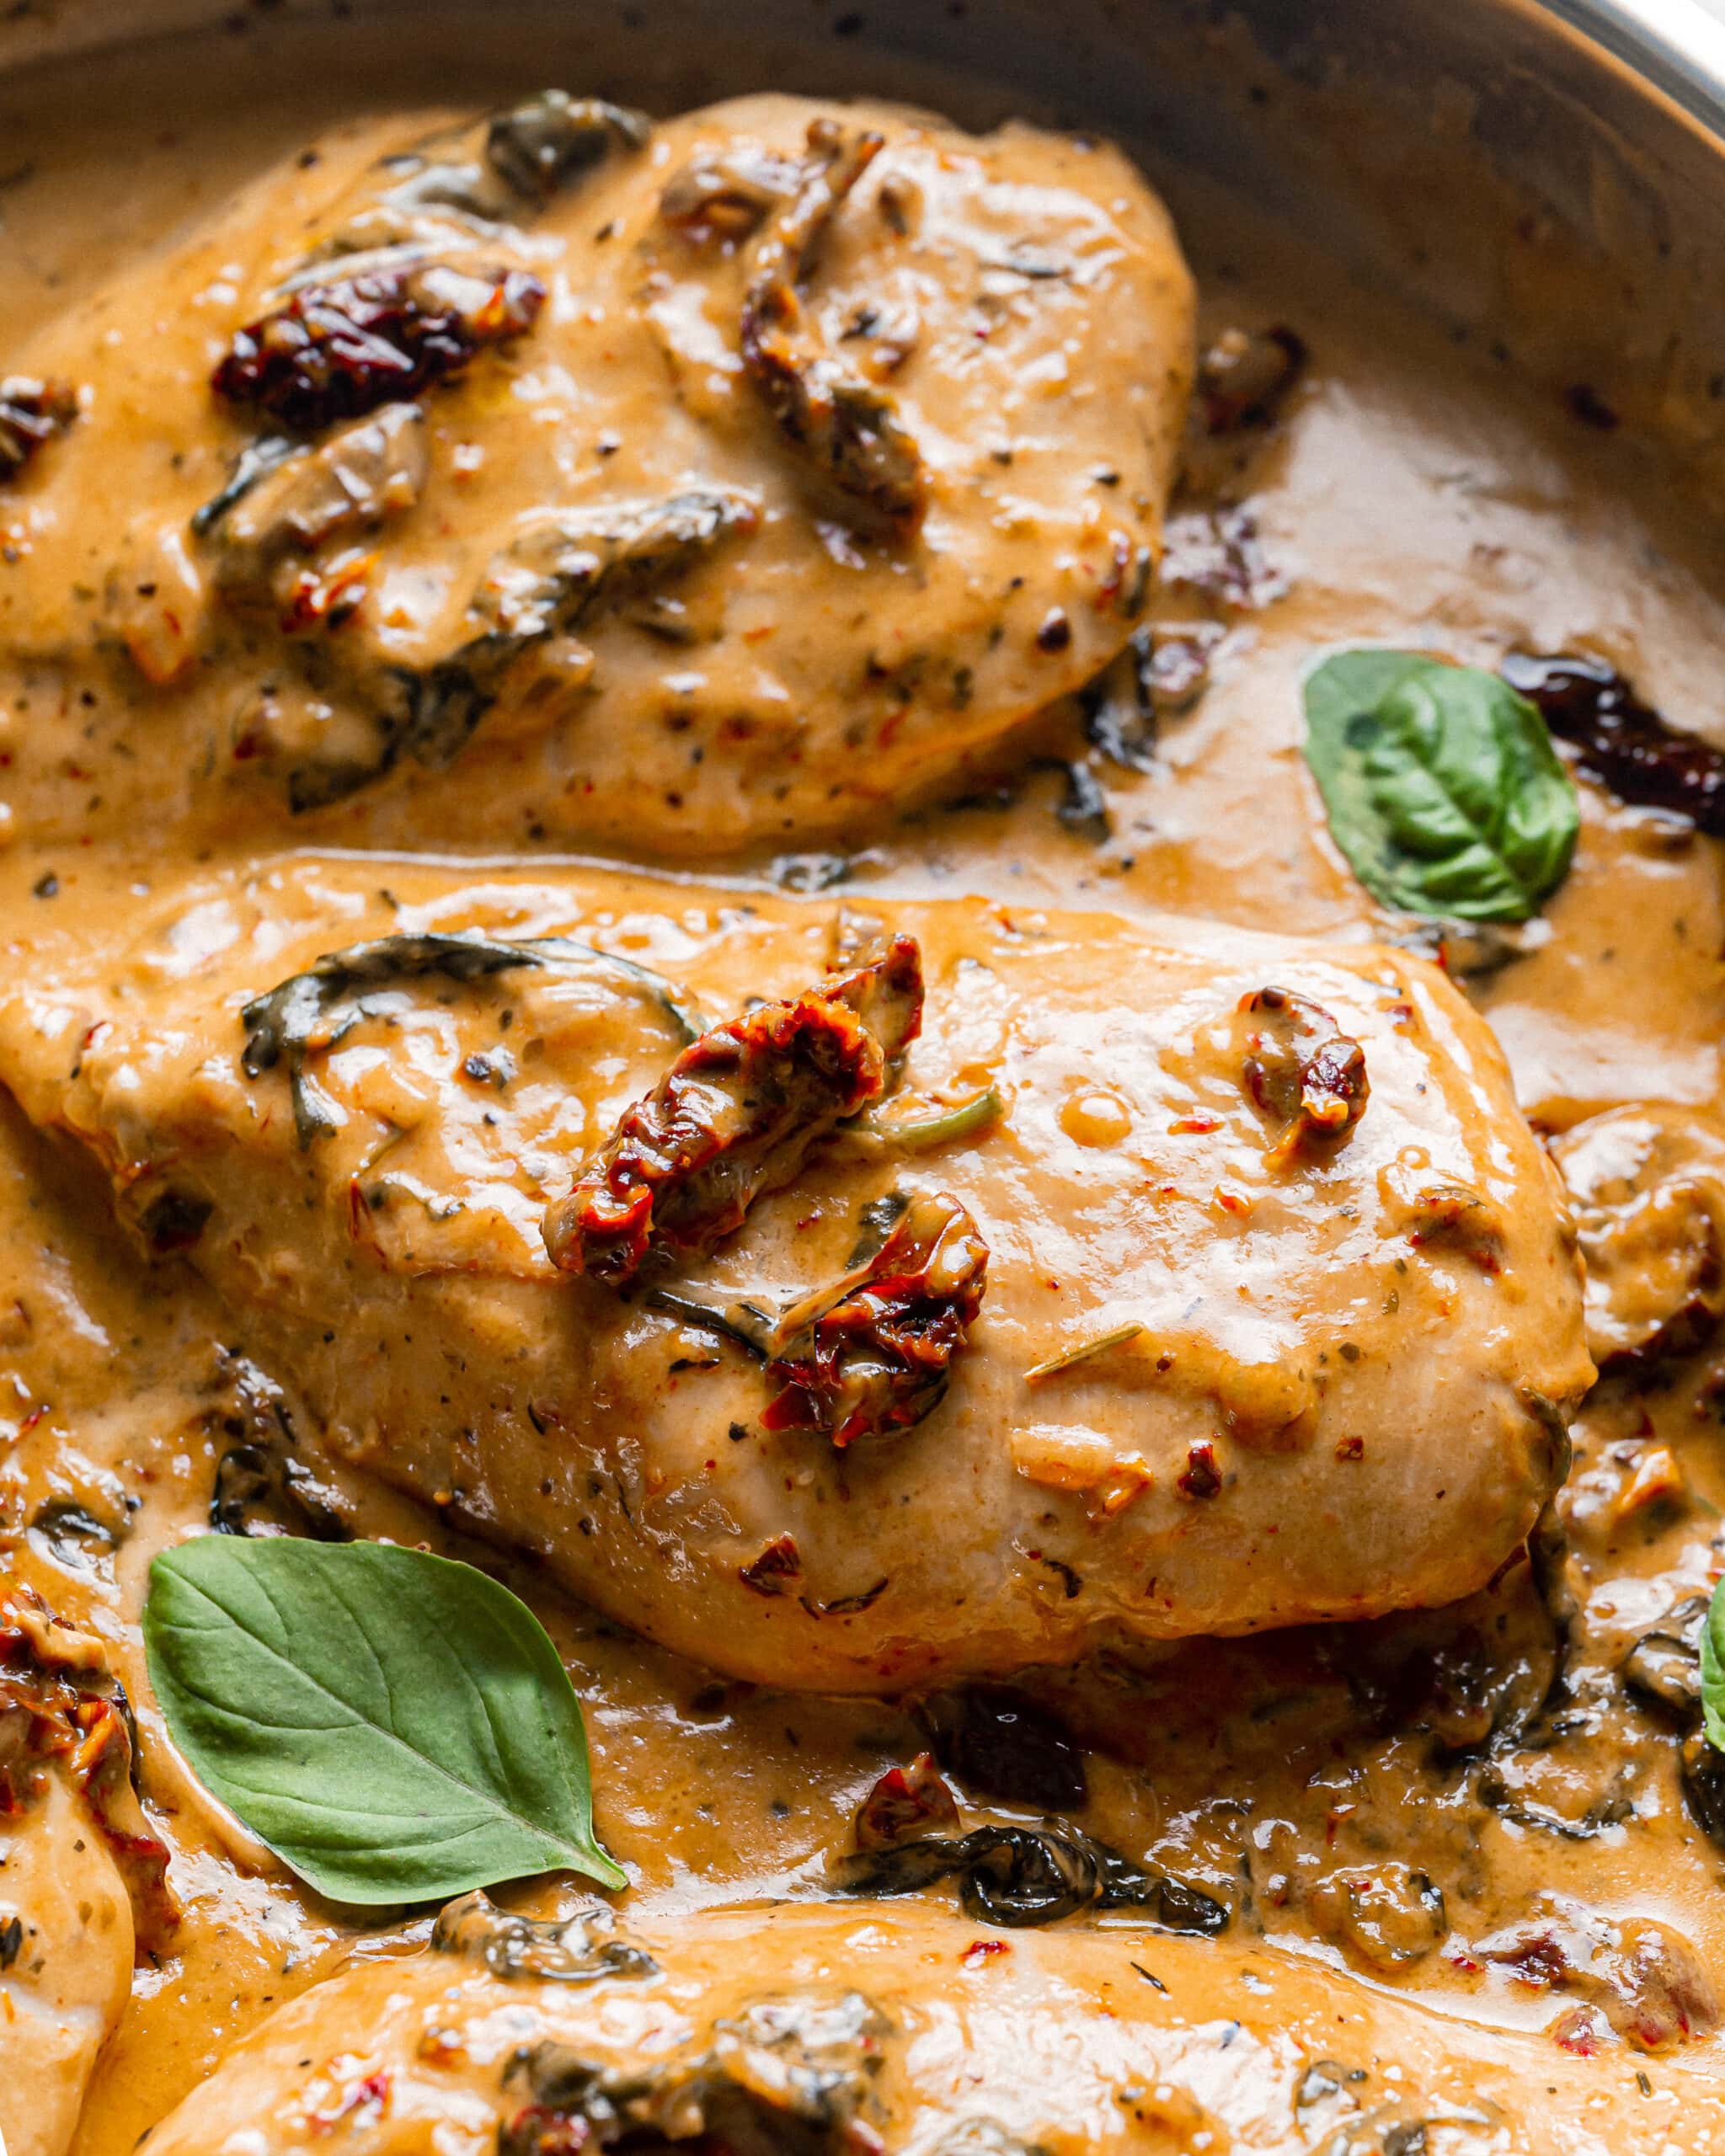 Three pieces of tuscan chicken, coated in a rich tomato cream sauce with fresh basil leaves and sundried tomatoes on top.